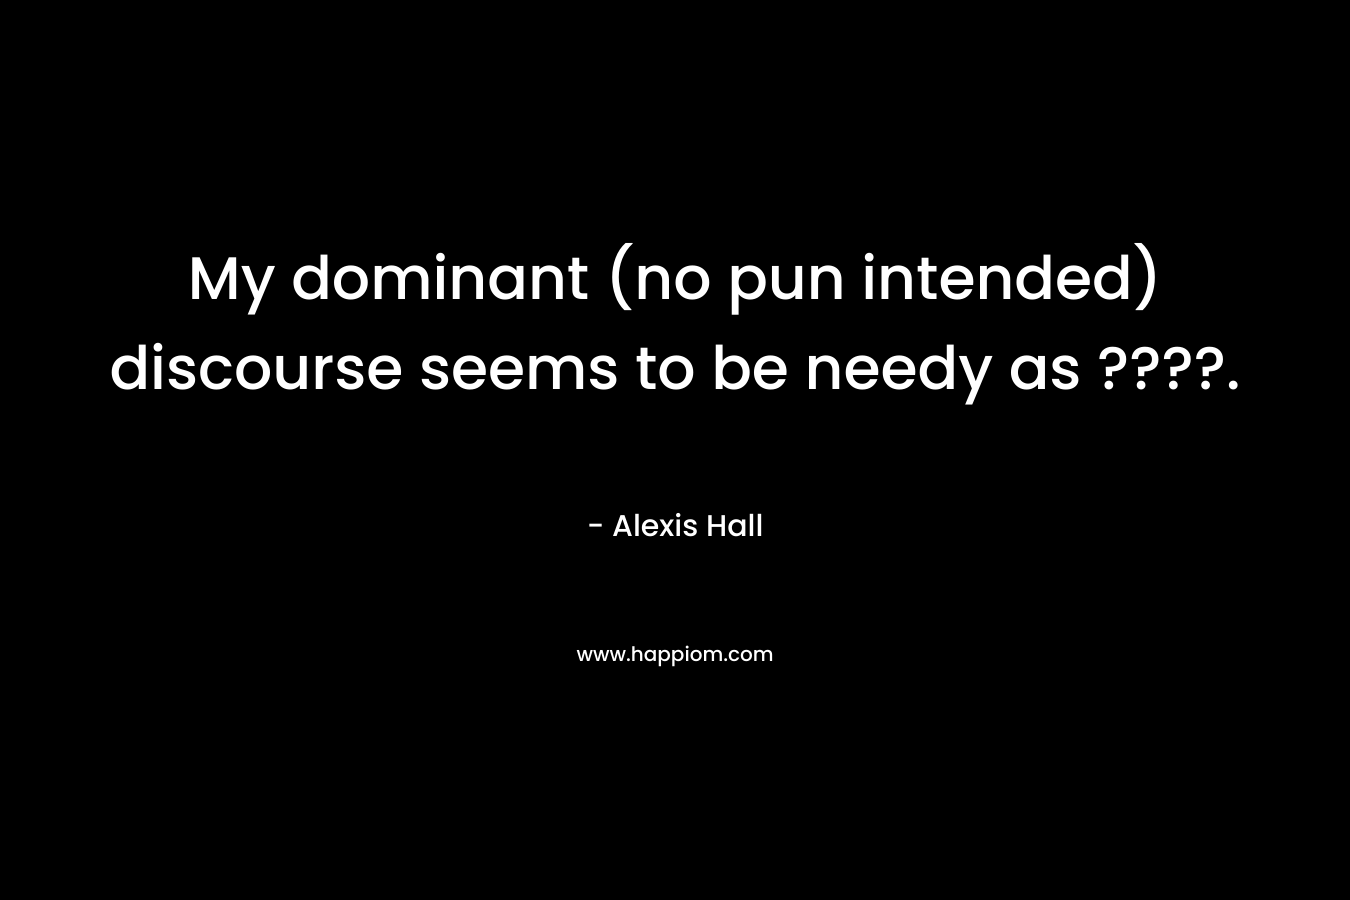 My dominant (no pun intended) discourse seems to be needy as ????. – Alexis  Hall